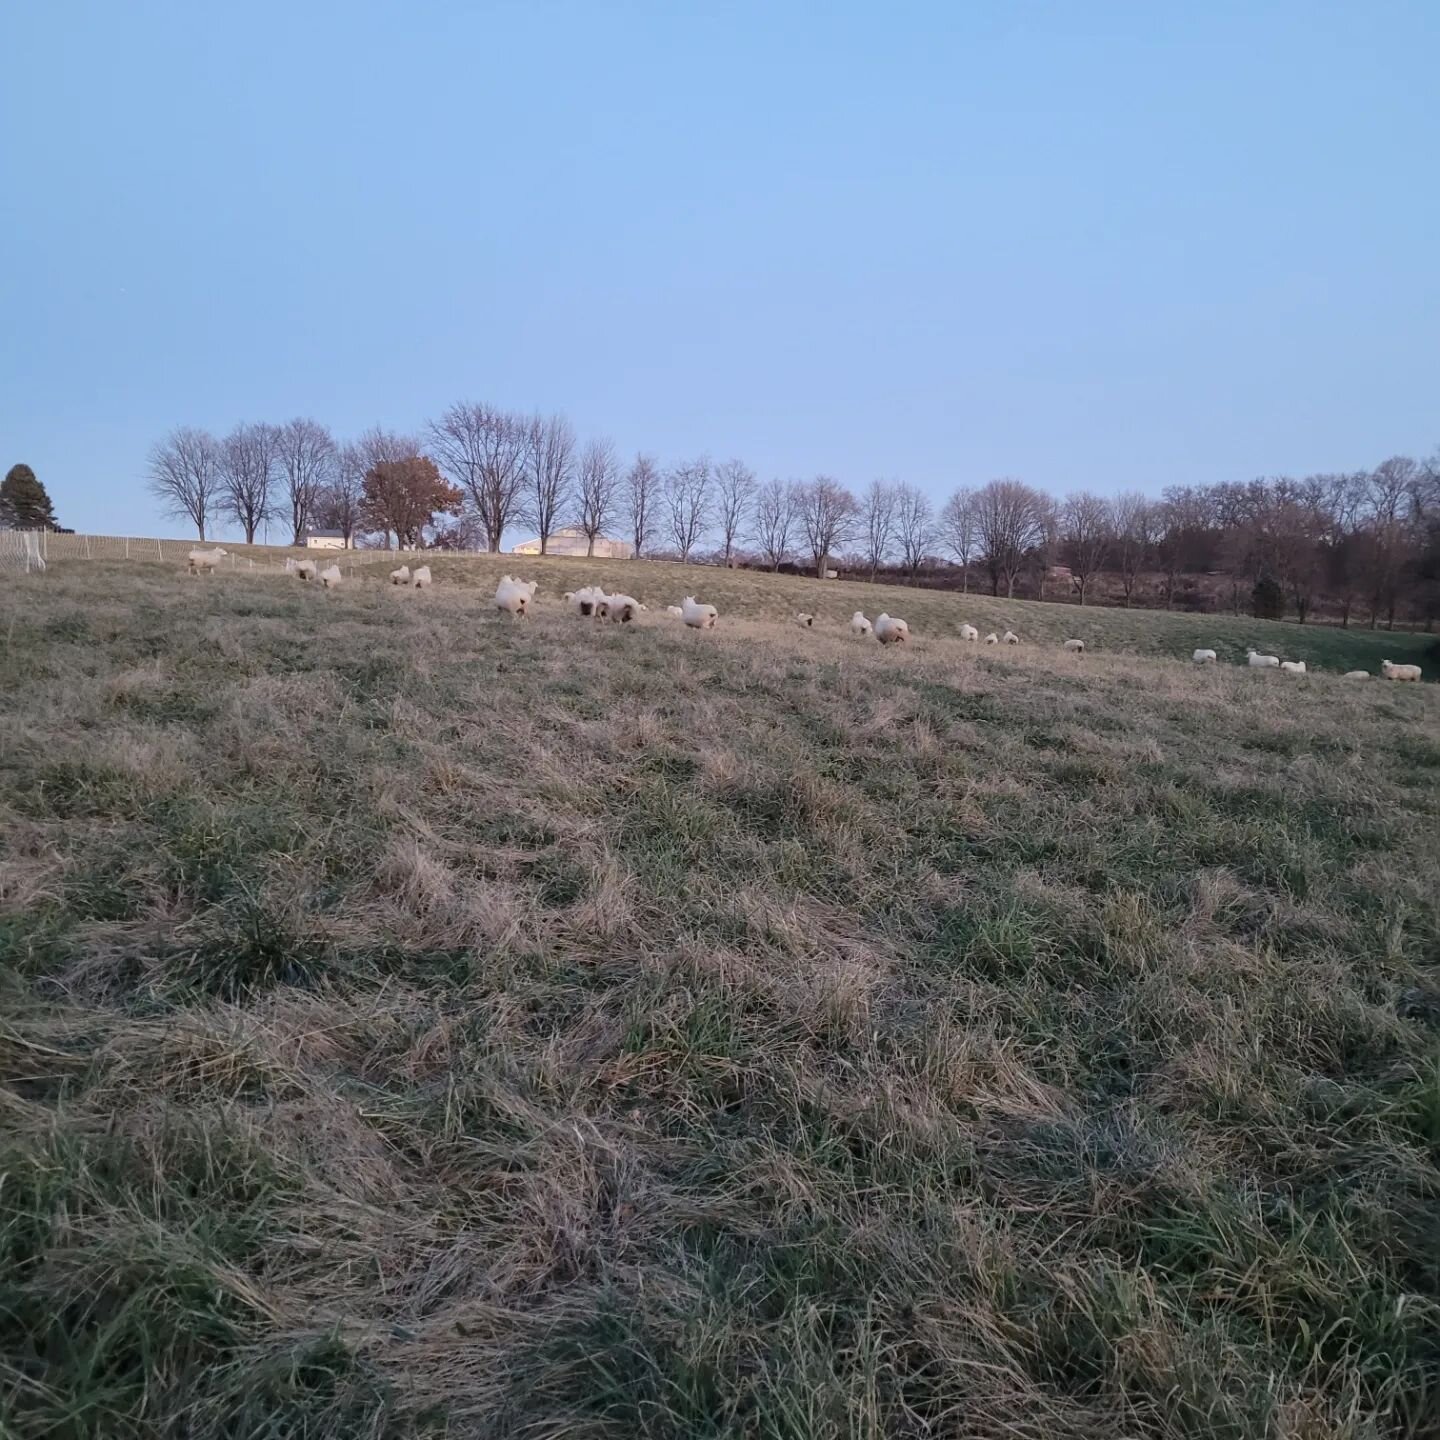 There is something so satisfying about December grazing. Maybe its that it feels like an unplanned bonus. Whatever it is, it is fun. I am  especially thankful to be able to graze off a neighbors hay field (fresh ground with no parasites from previous